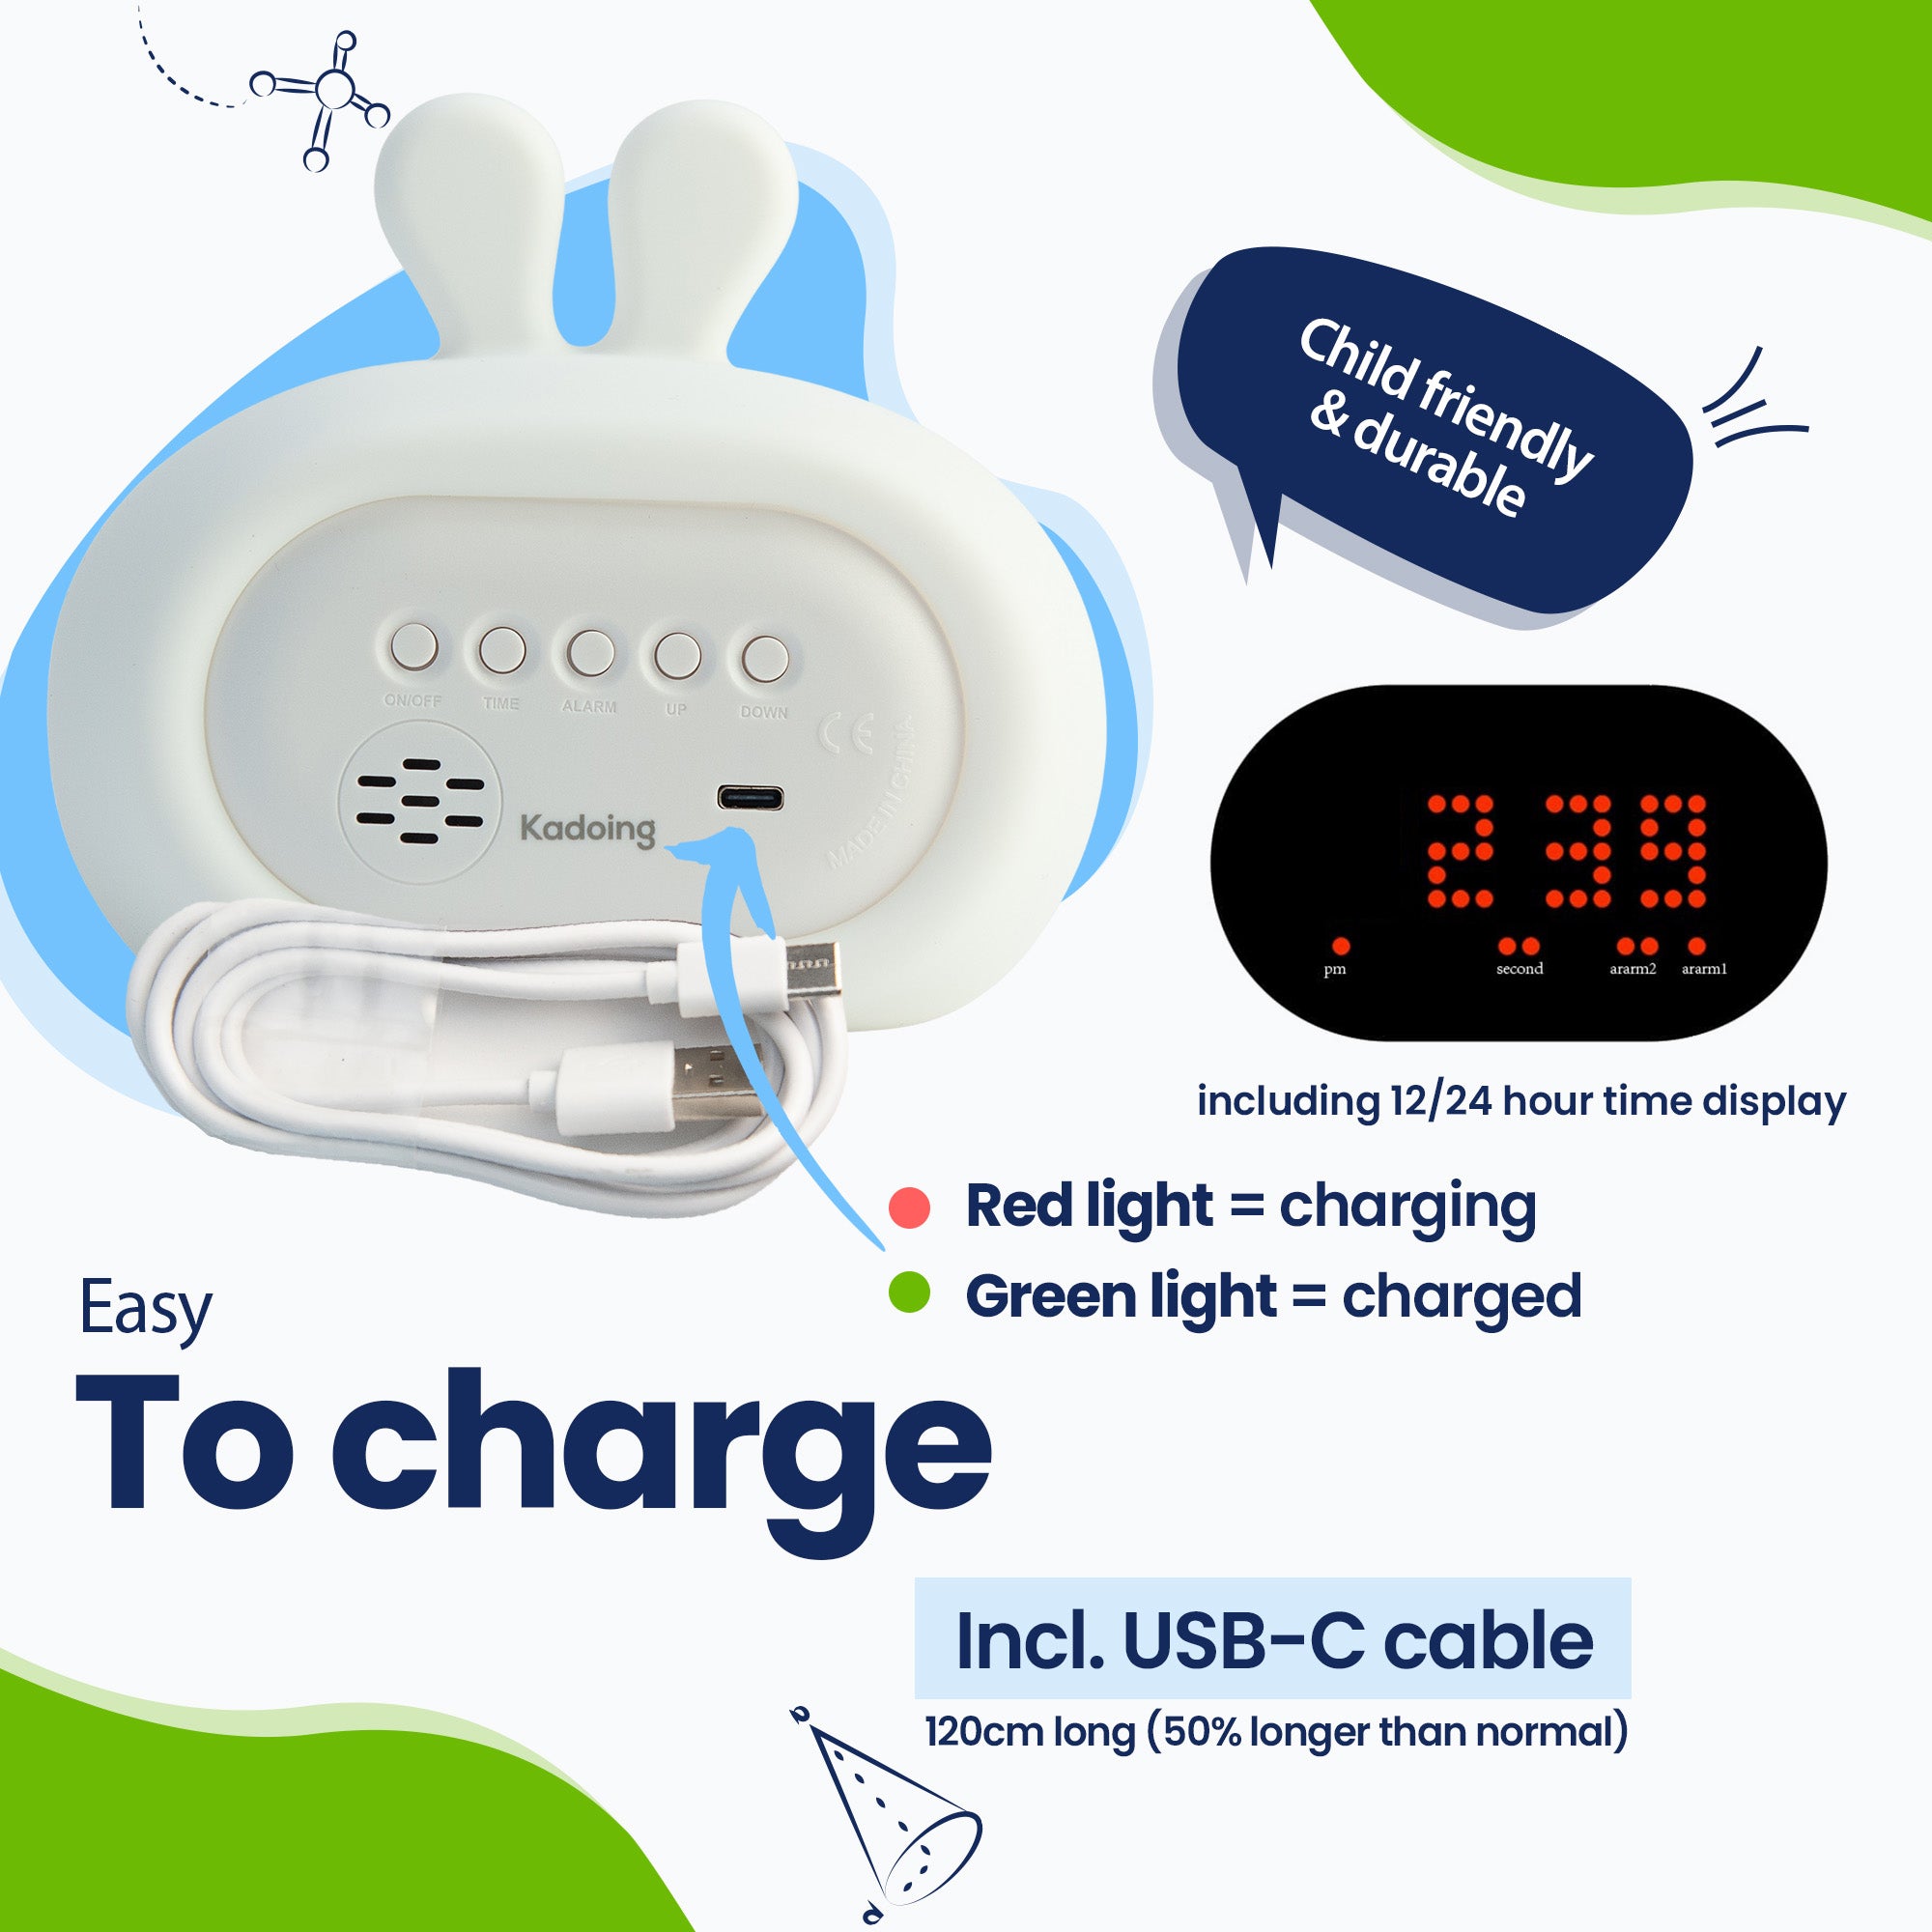 The Rabbit children's alarm clock is easy to charge. Incl. USB-C cable. Kids-proof.